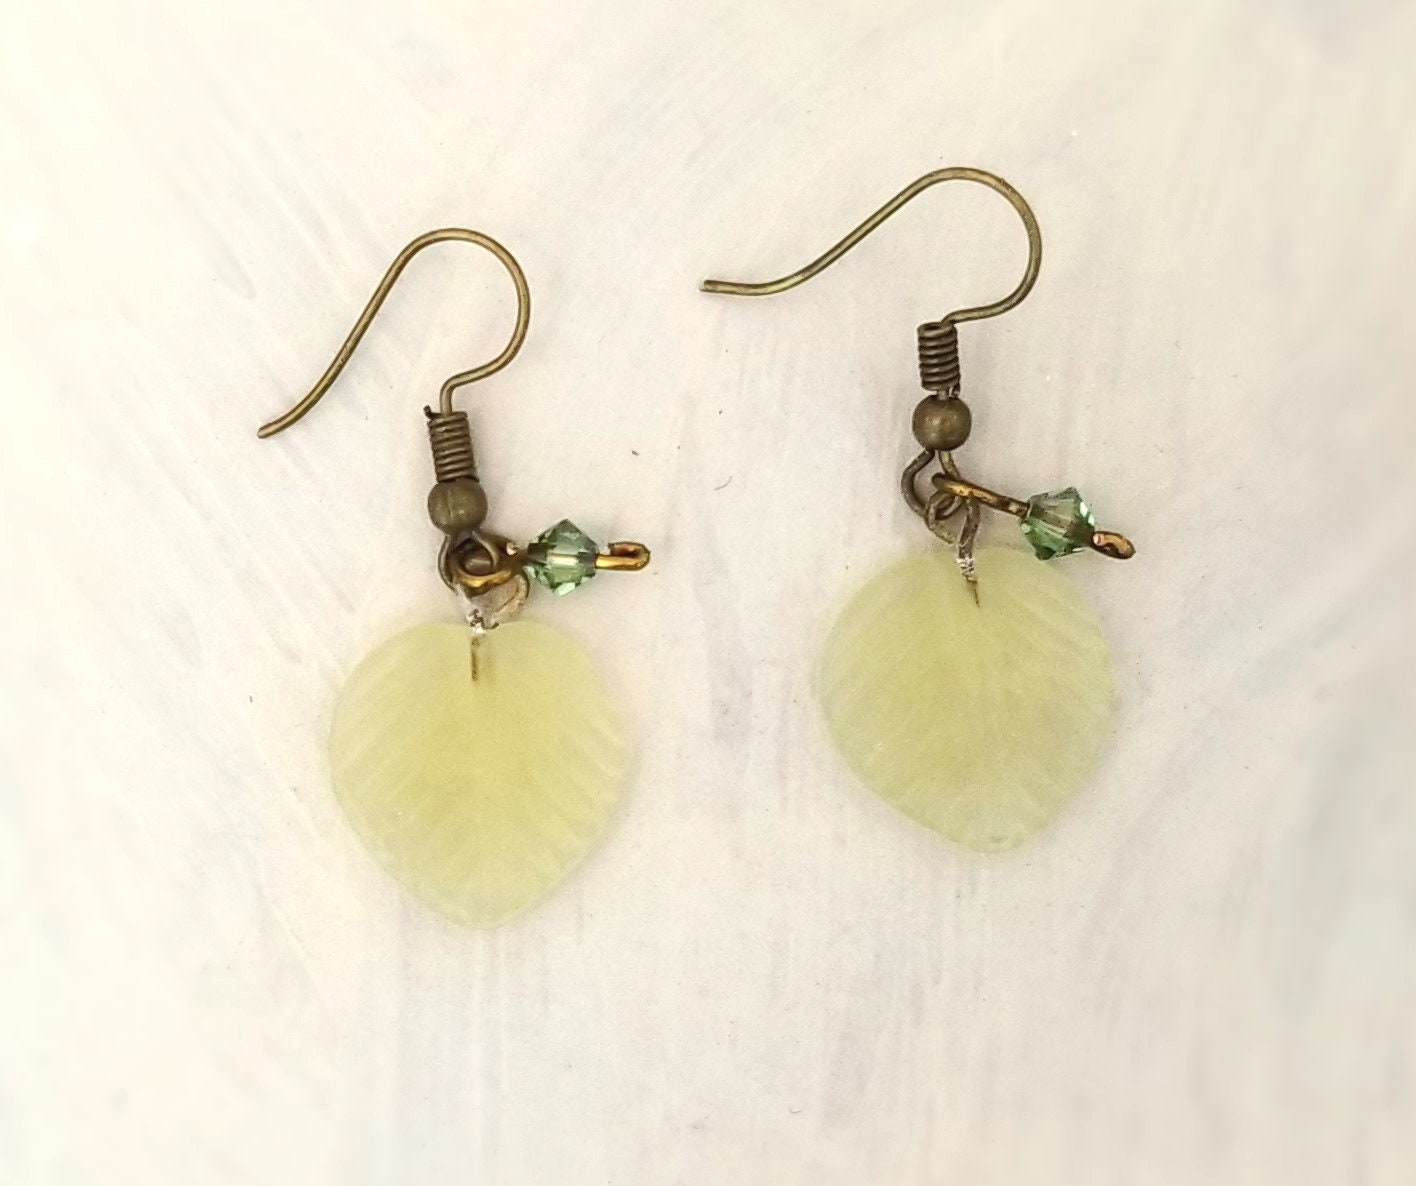 Medium Glass Leaf Earrings in Frosted Light Yellowish Green, Wedding, Bridesmaid, Art Nouveau, Renaissance, Forest, Choice of Closure Types